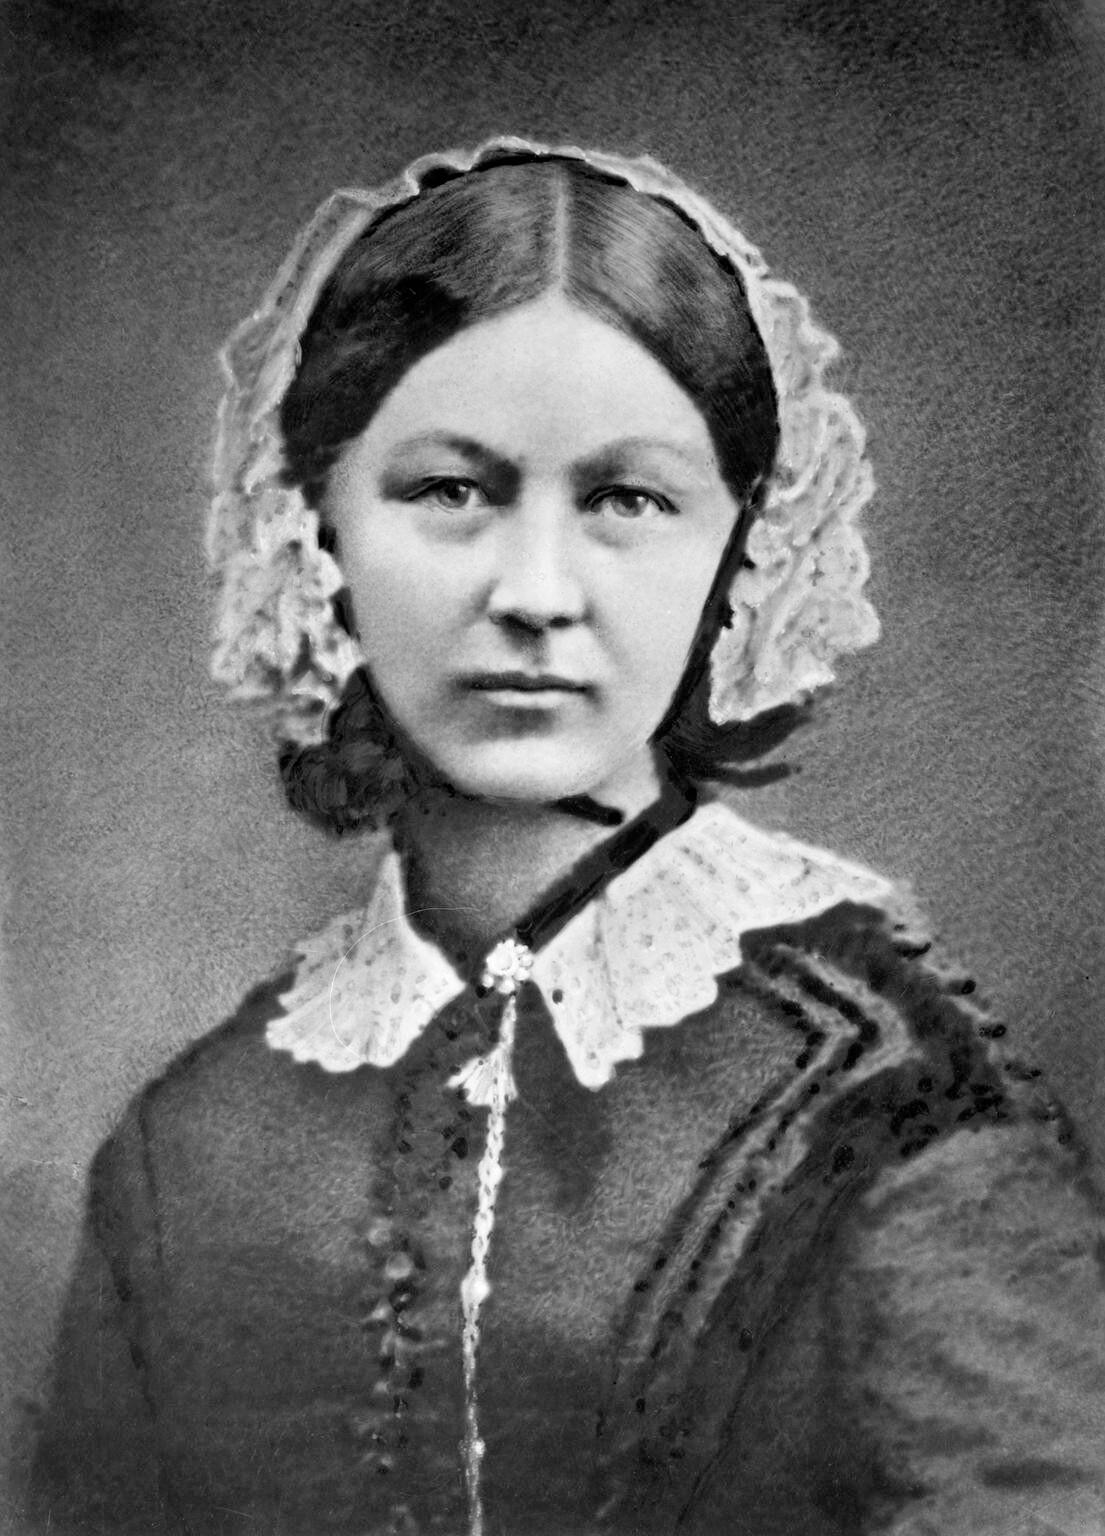 A portrait of Florence Nightingale wearing a white lace bonnet.